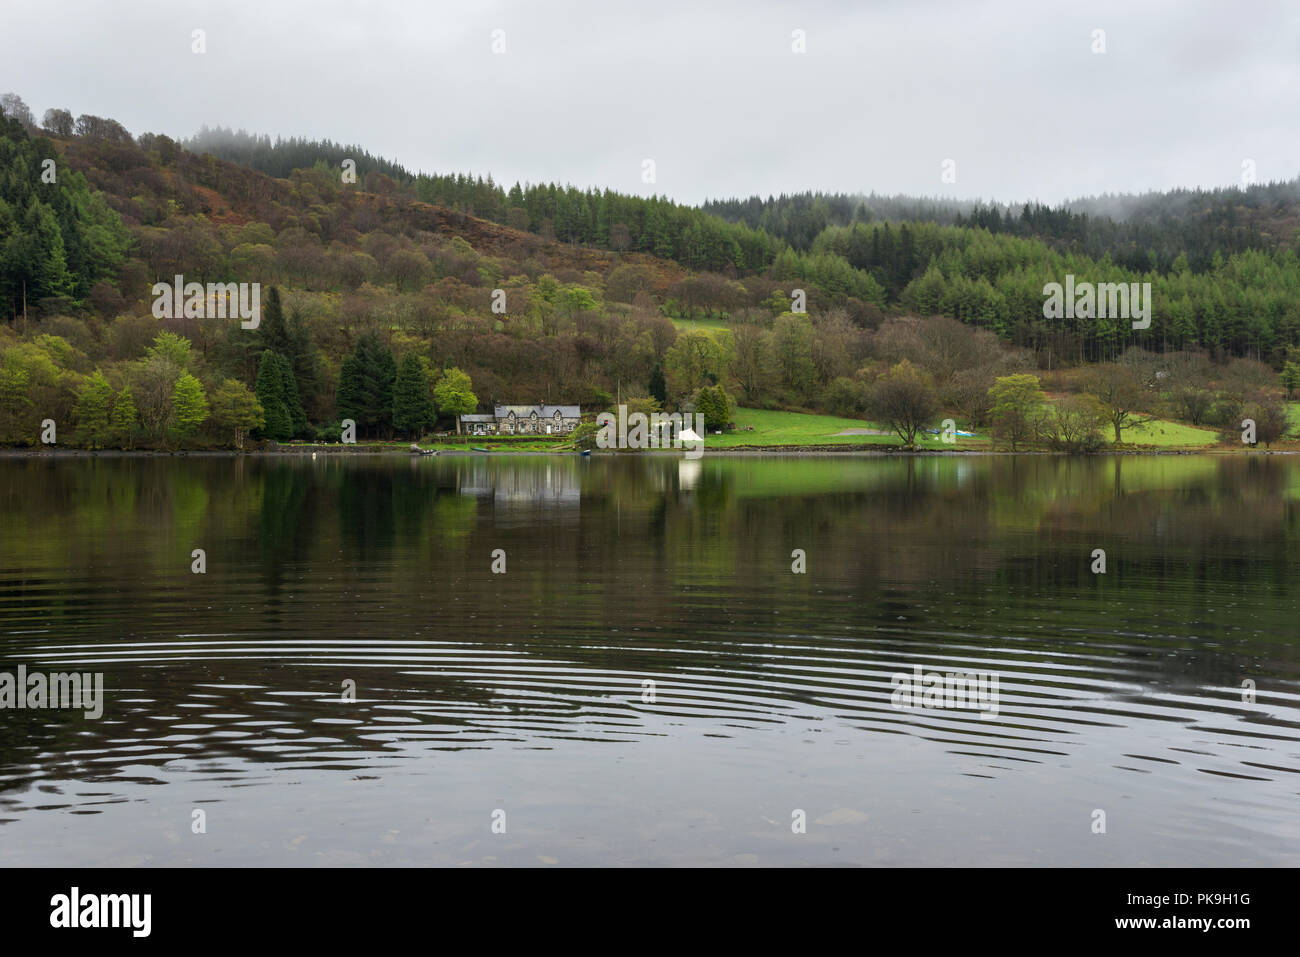 Rainy spring day at Llyn Crafnant near Trefriw in Snowdonia, North Wales. The lakeside cafe on the opposite bank. Stock Photo